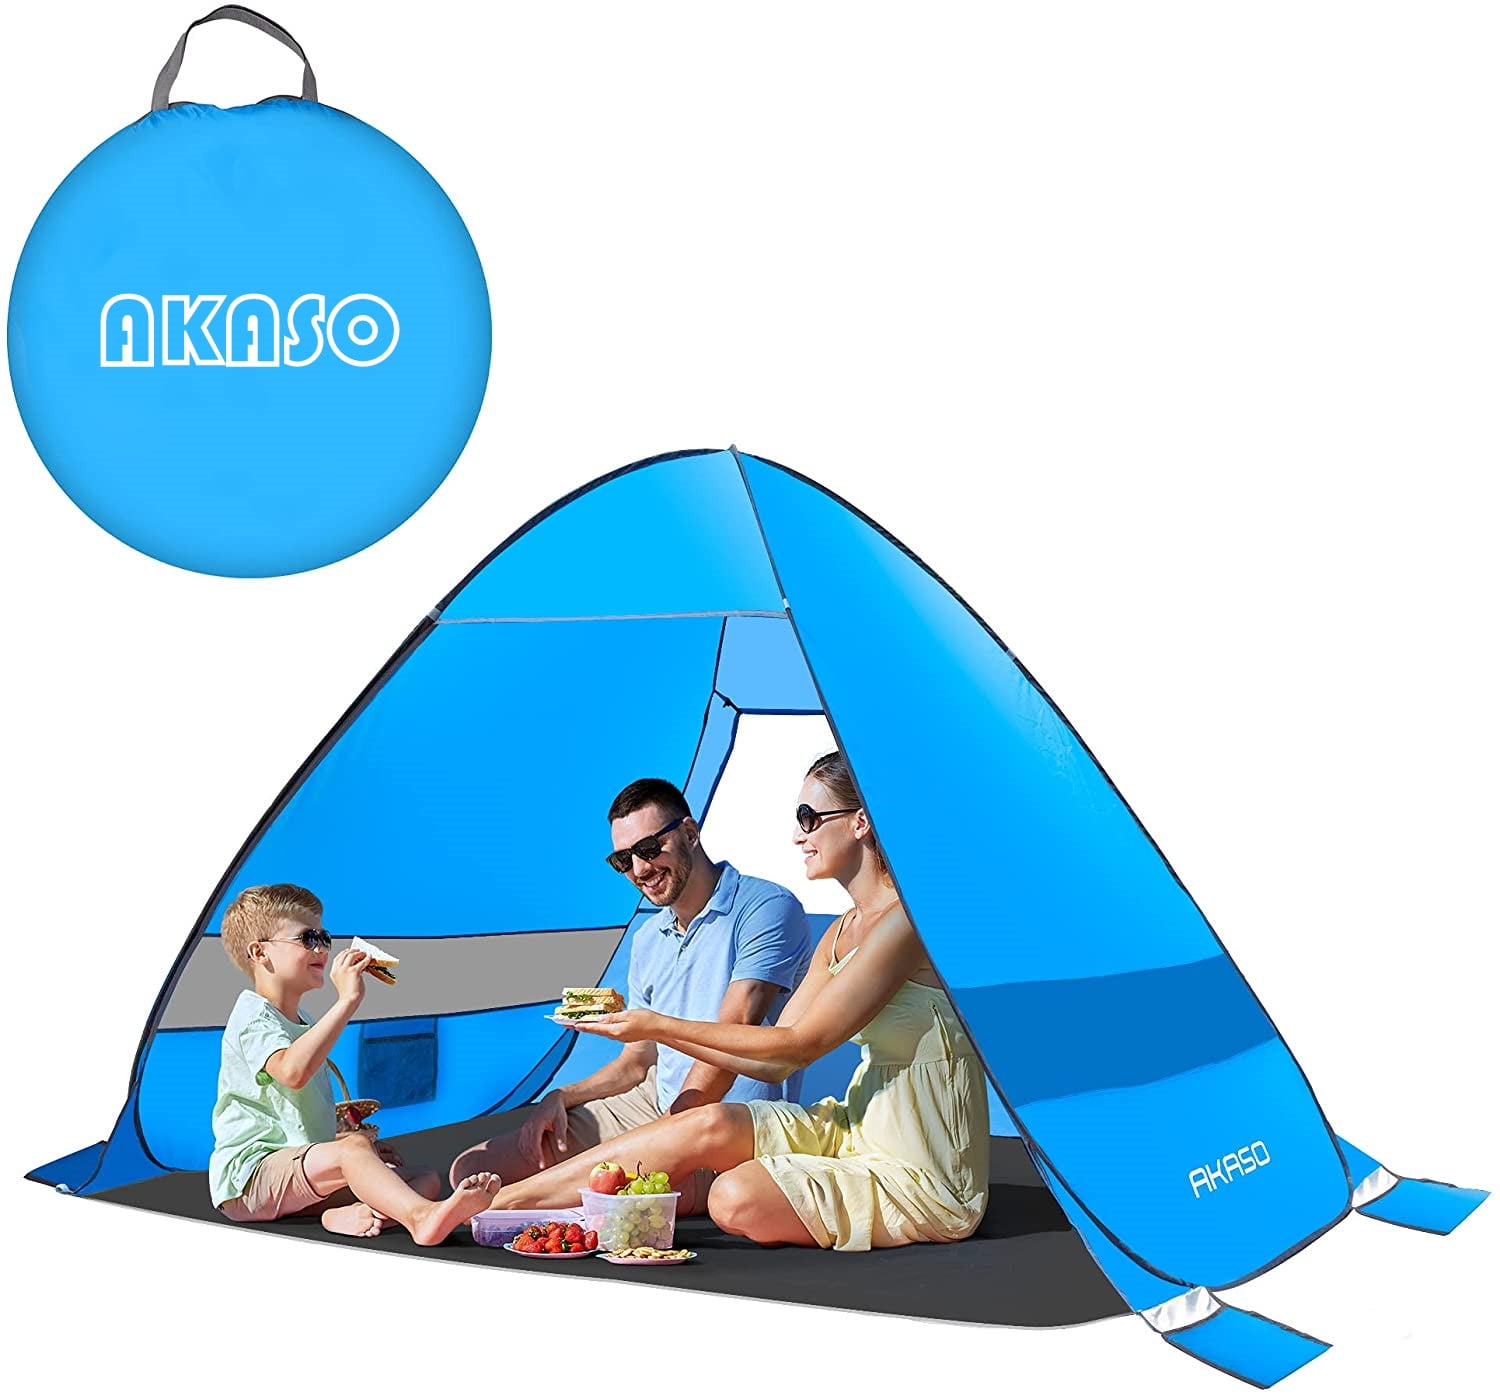 3 Ventilation Windows & Extended Floor AKASO Pop Up Beach Tent for 3-4 Person X-Large Portable Beach Shade Sun Shelter with UPF 50+ UV Protection Easy Setup Family Beach Shelter Blue